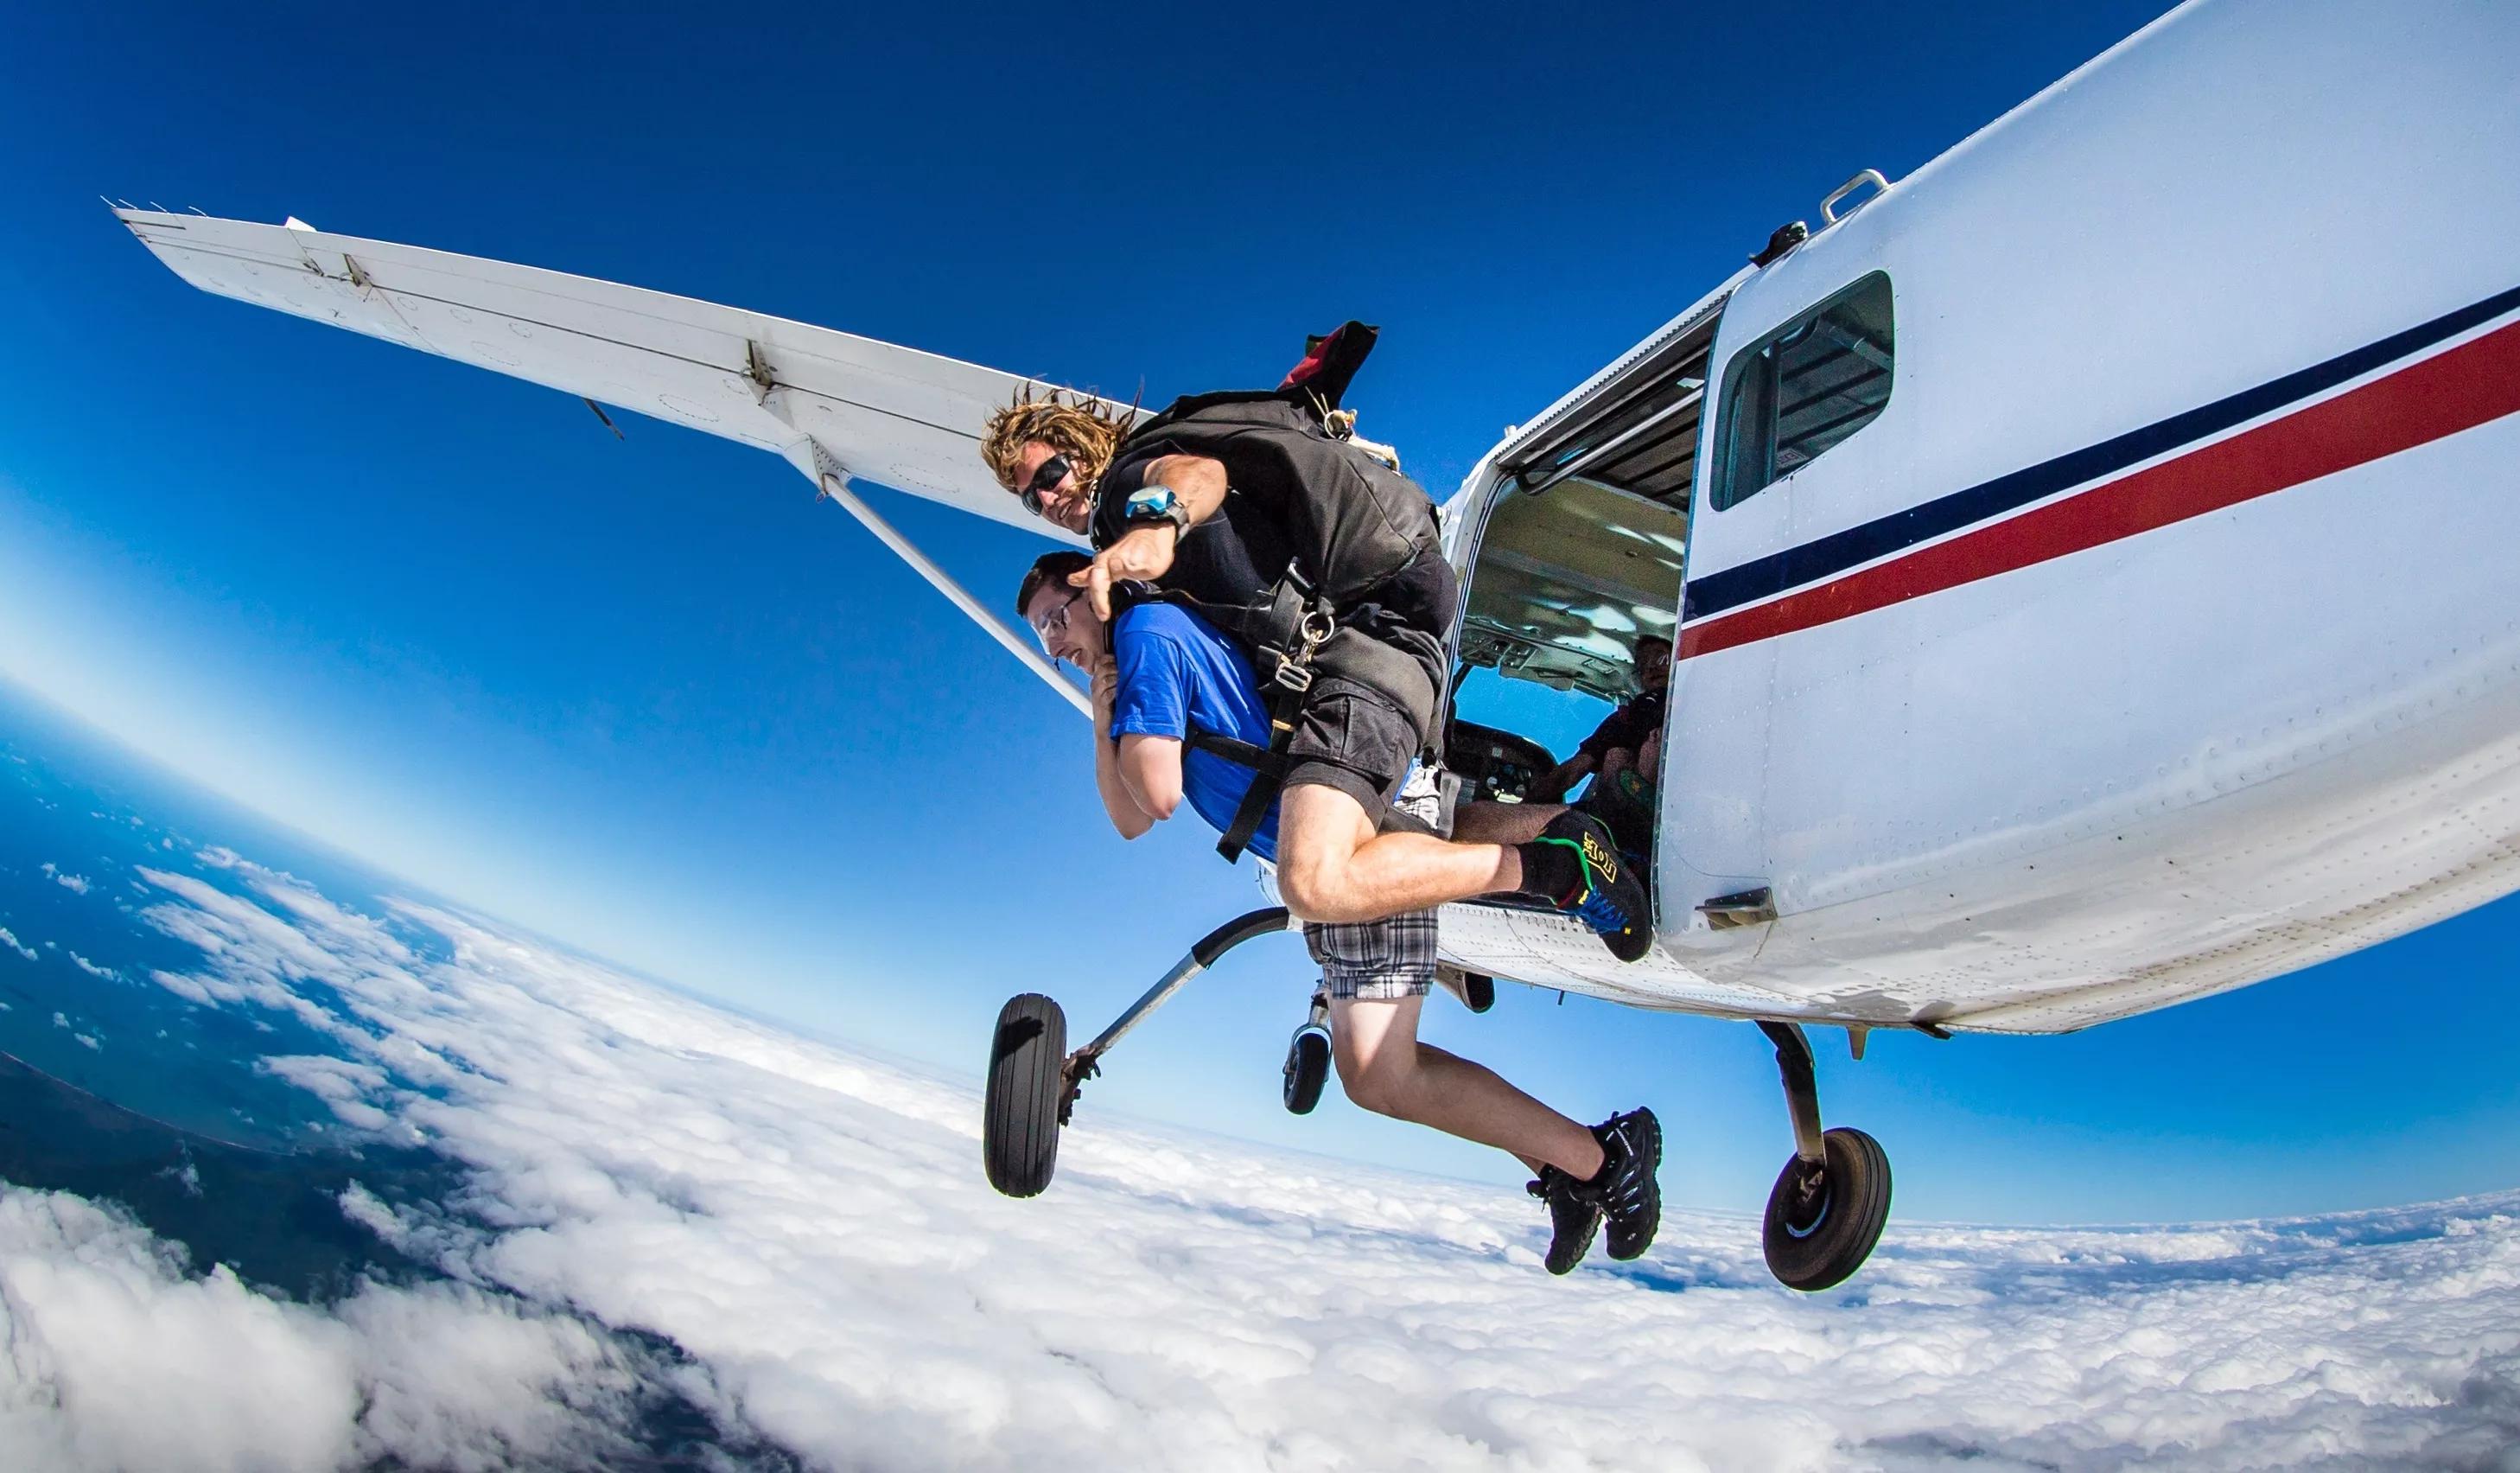 Skydive Sydney Wollongong in Australia, Australia and Oceania | Skydiving - Rated 4.8